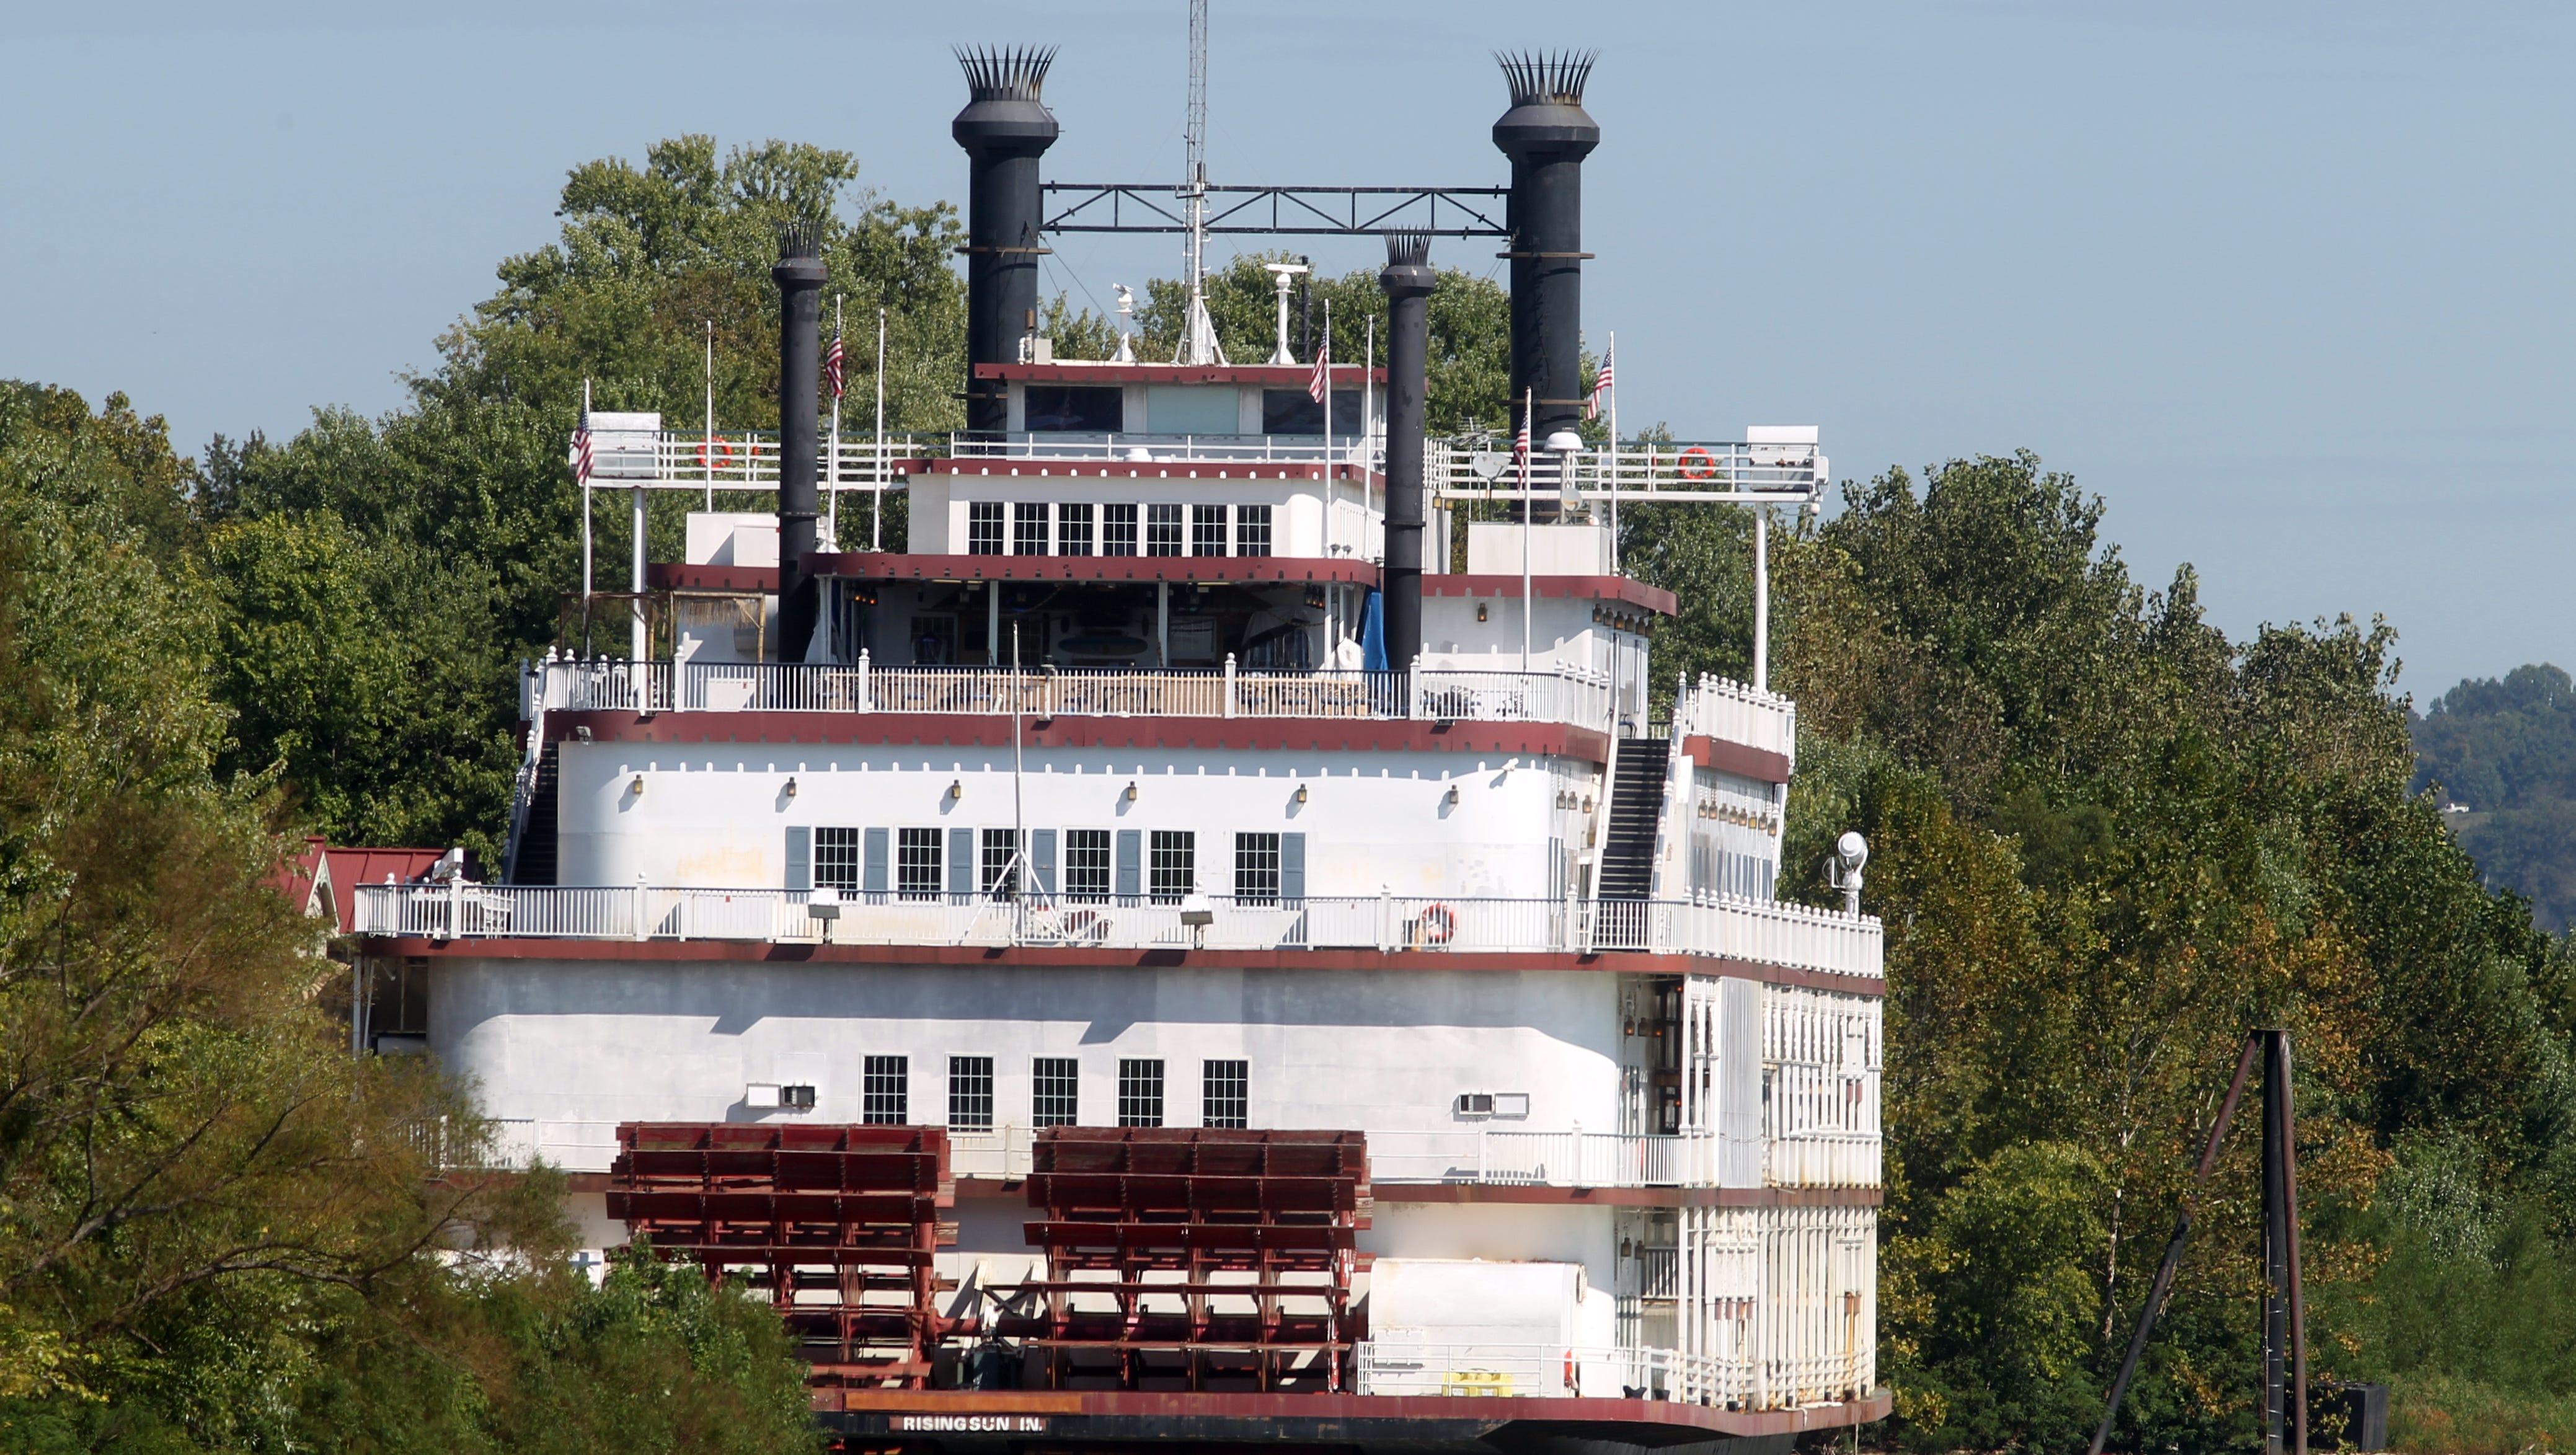 Rising Star casino boat moored on the Ohio River at Rising Sun, In.